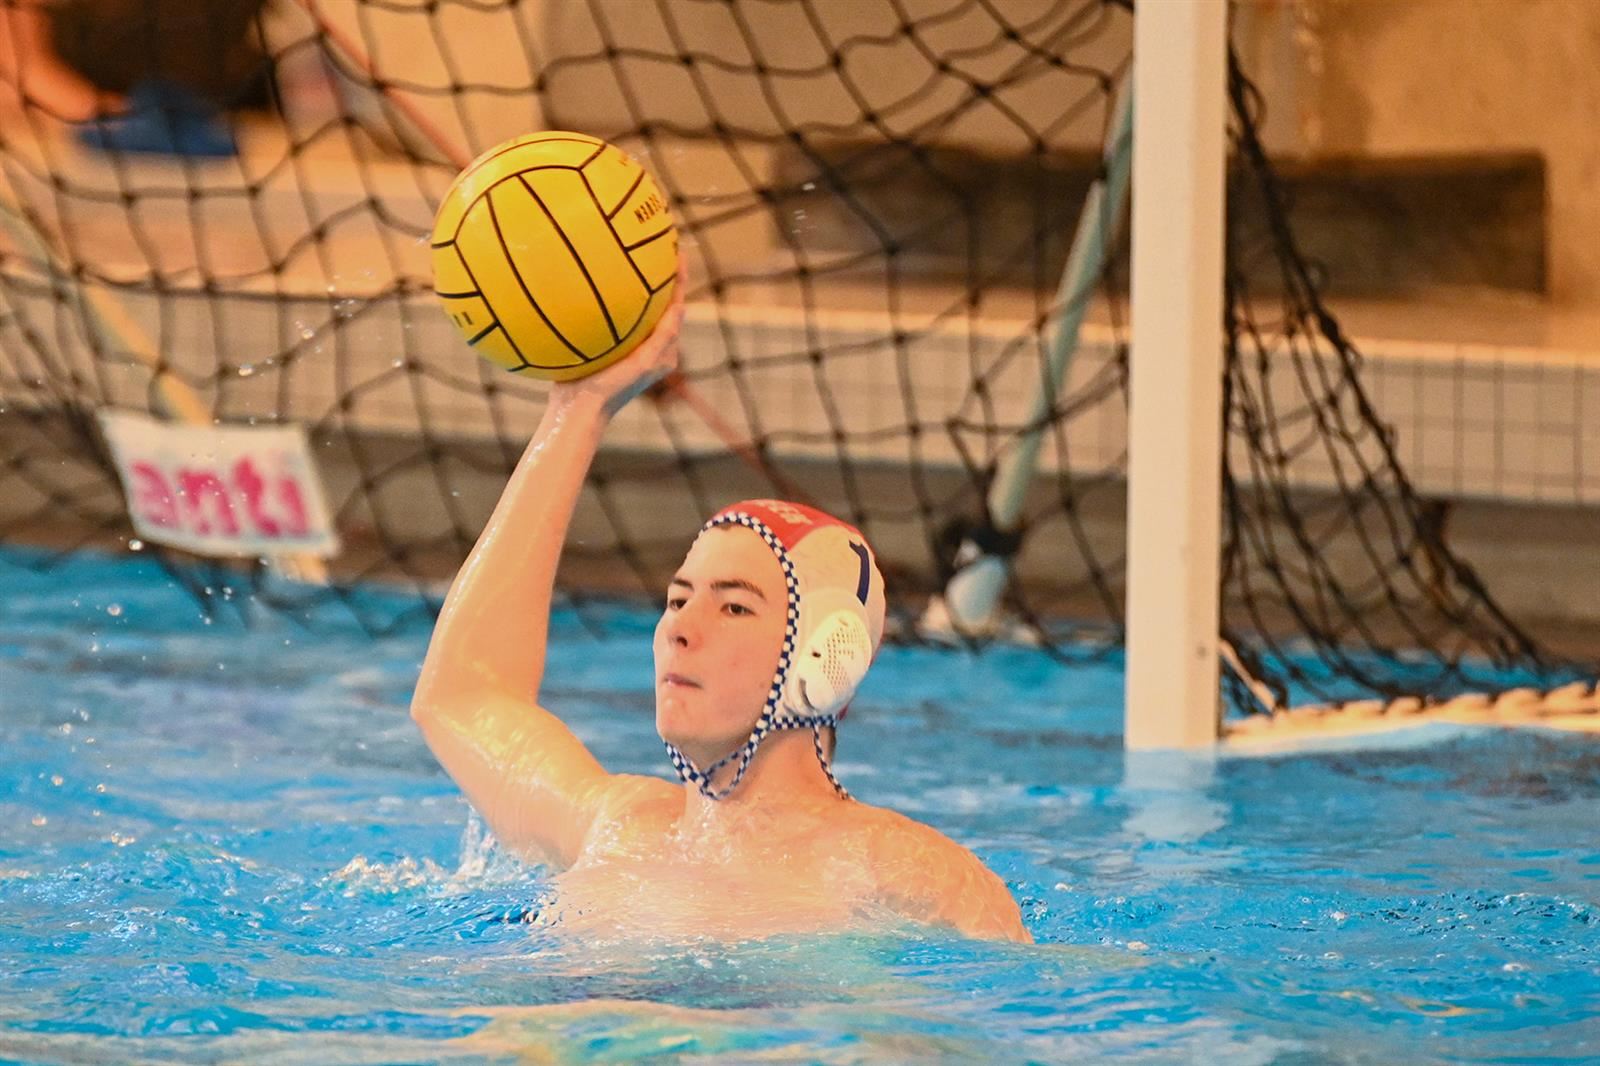 Cypress Creek High School senior Ryan Sharar was voted the District 17-6A boys’ water polo Goalkeeper of the Year.